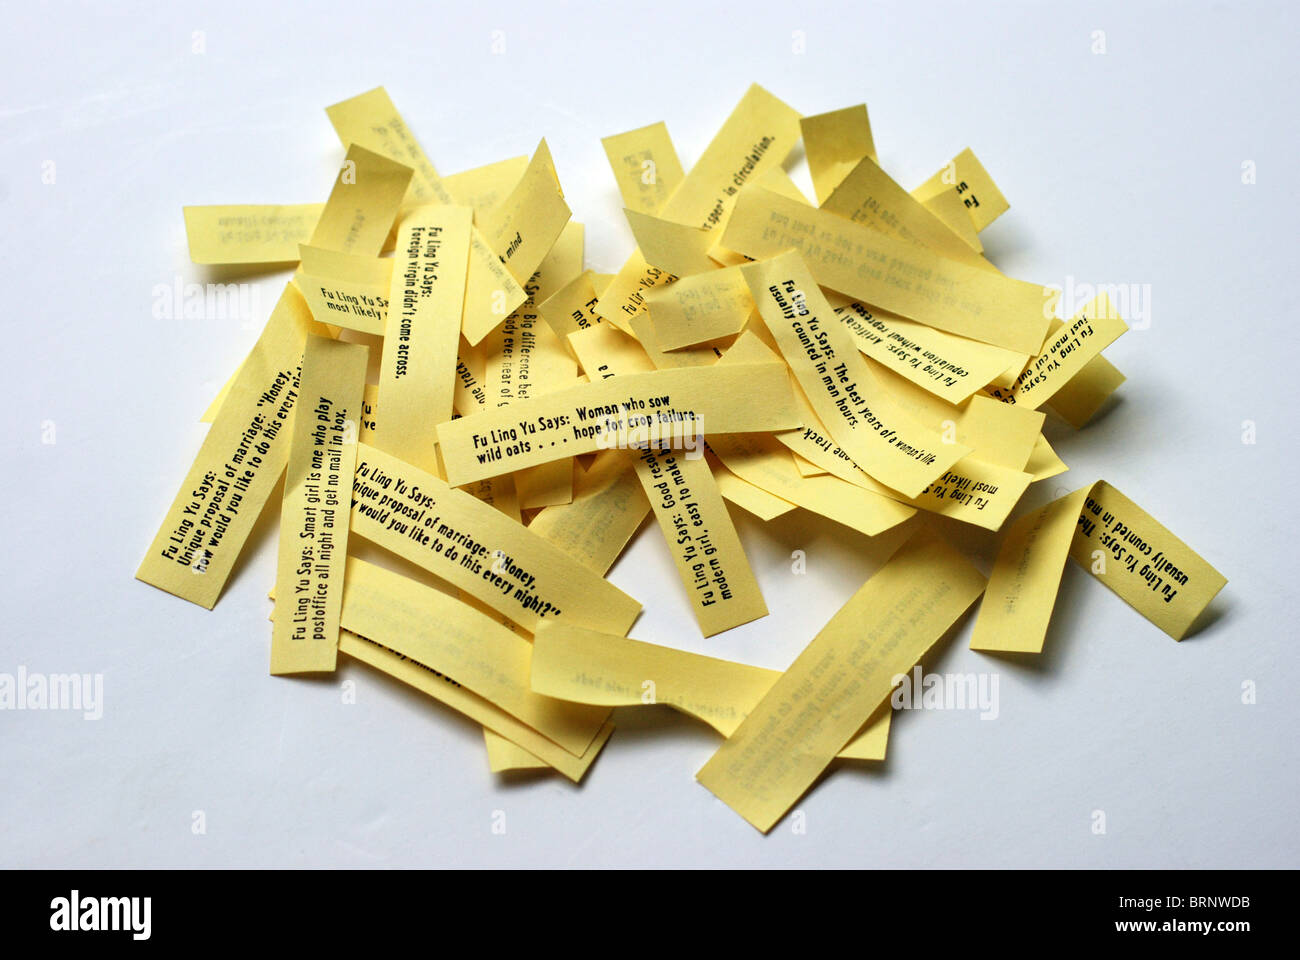 Pile of cheeky Fortune Cookie sayings on a white background Stock Photo